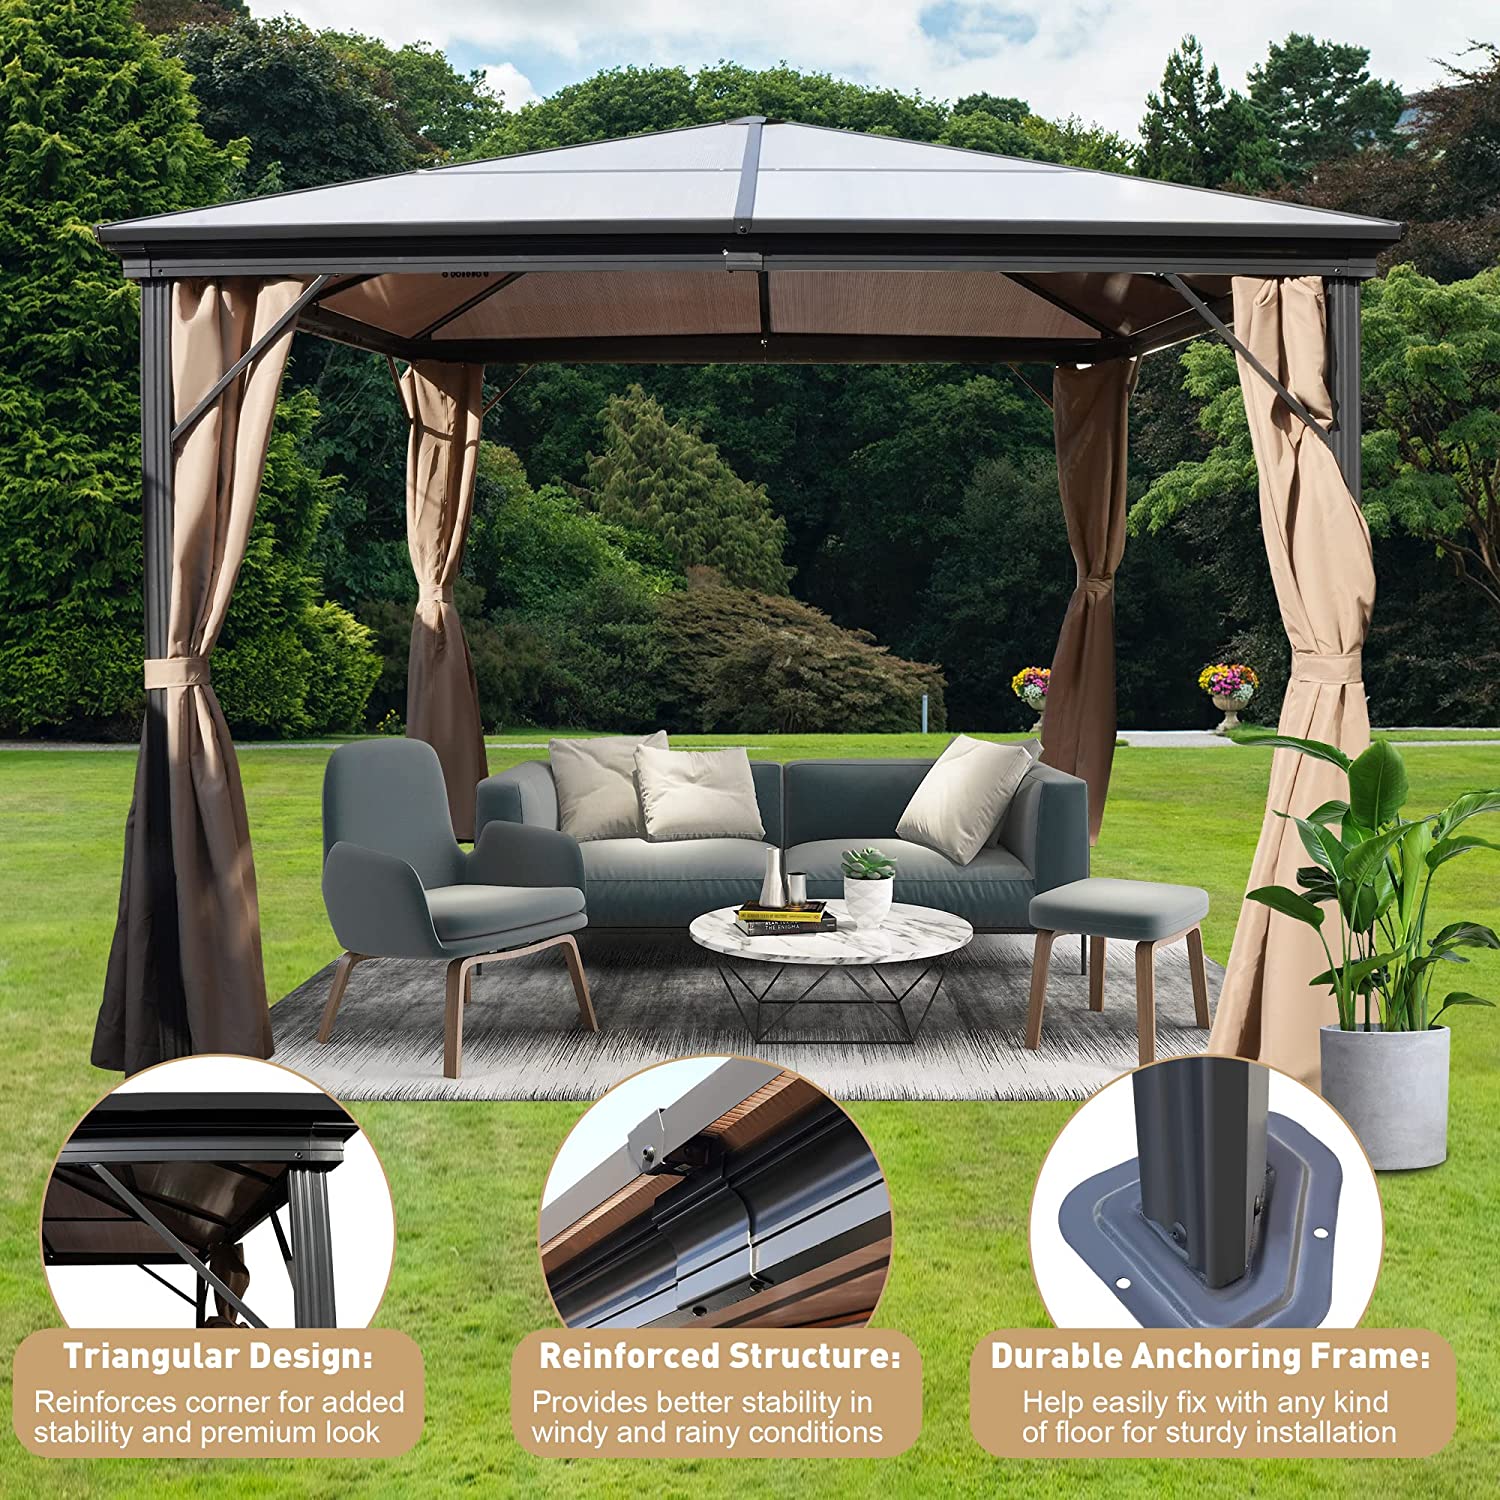 10x10 FT Hardtop Outdoor Gazebo, Aluminum Frame Polycarbonate Hardtop Garden Tent with Curtains & Mosquito Netting